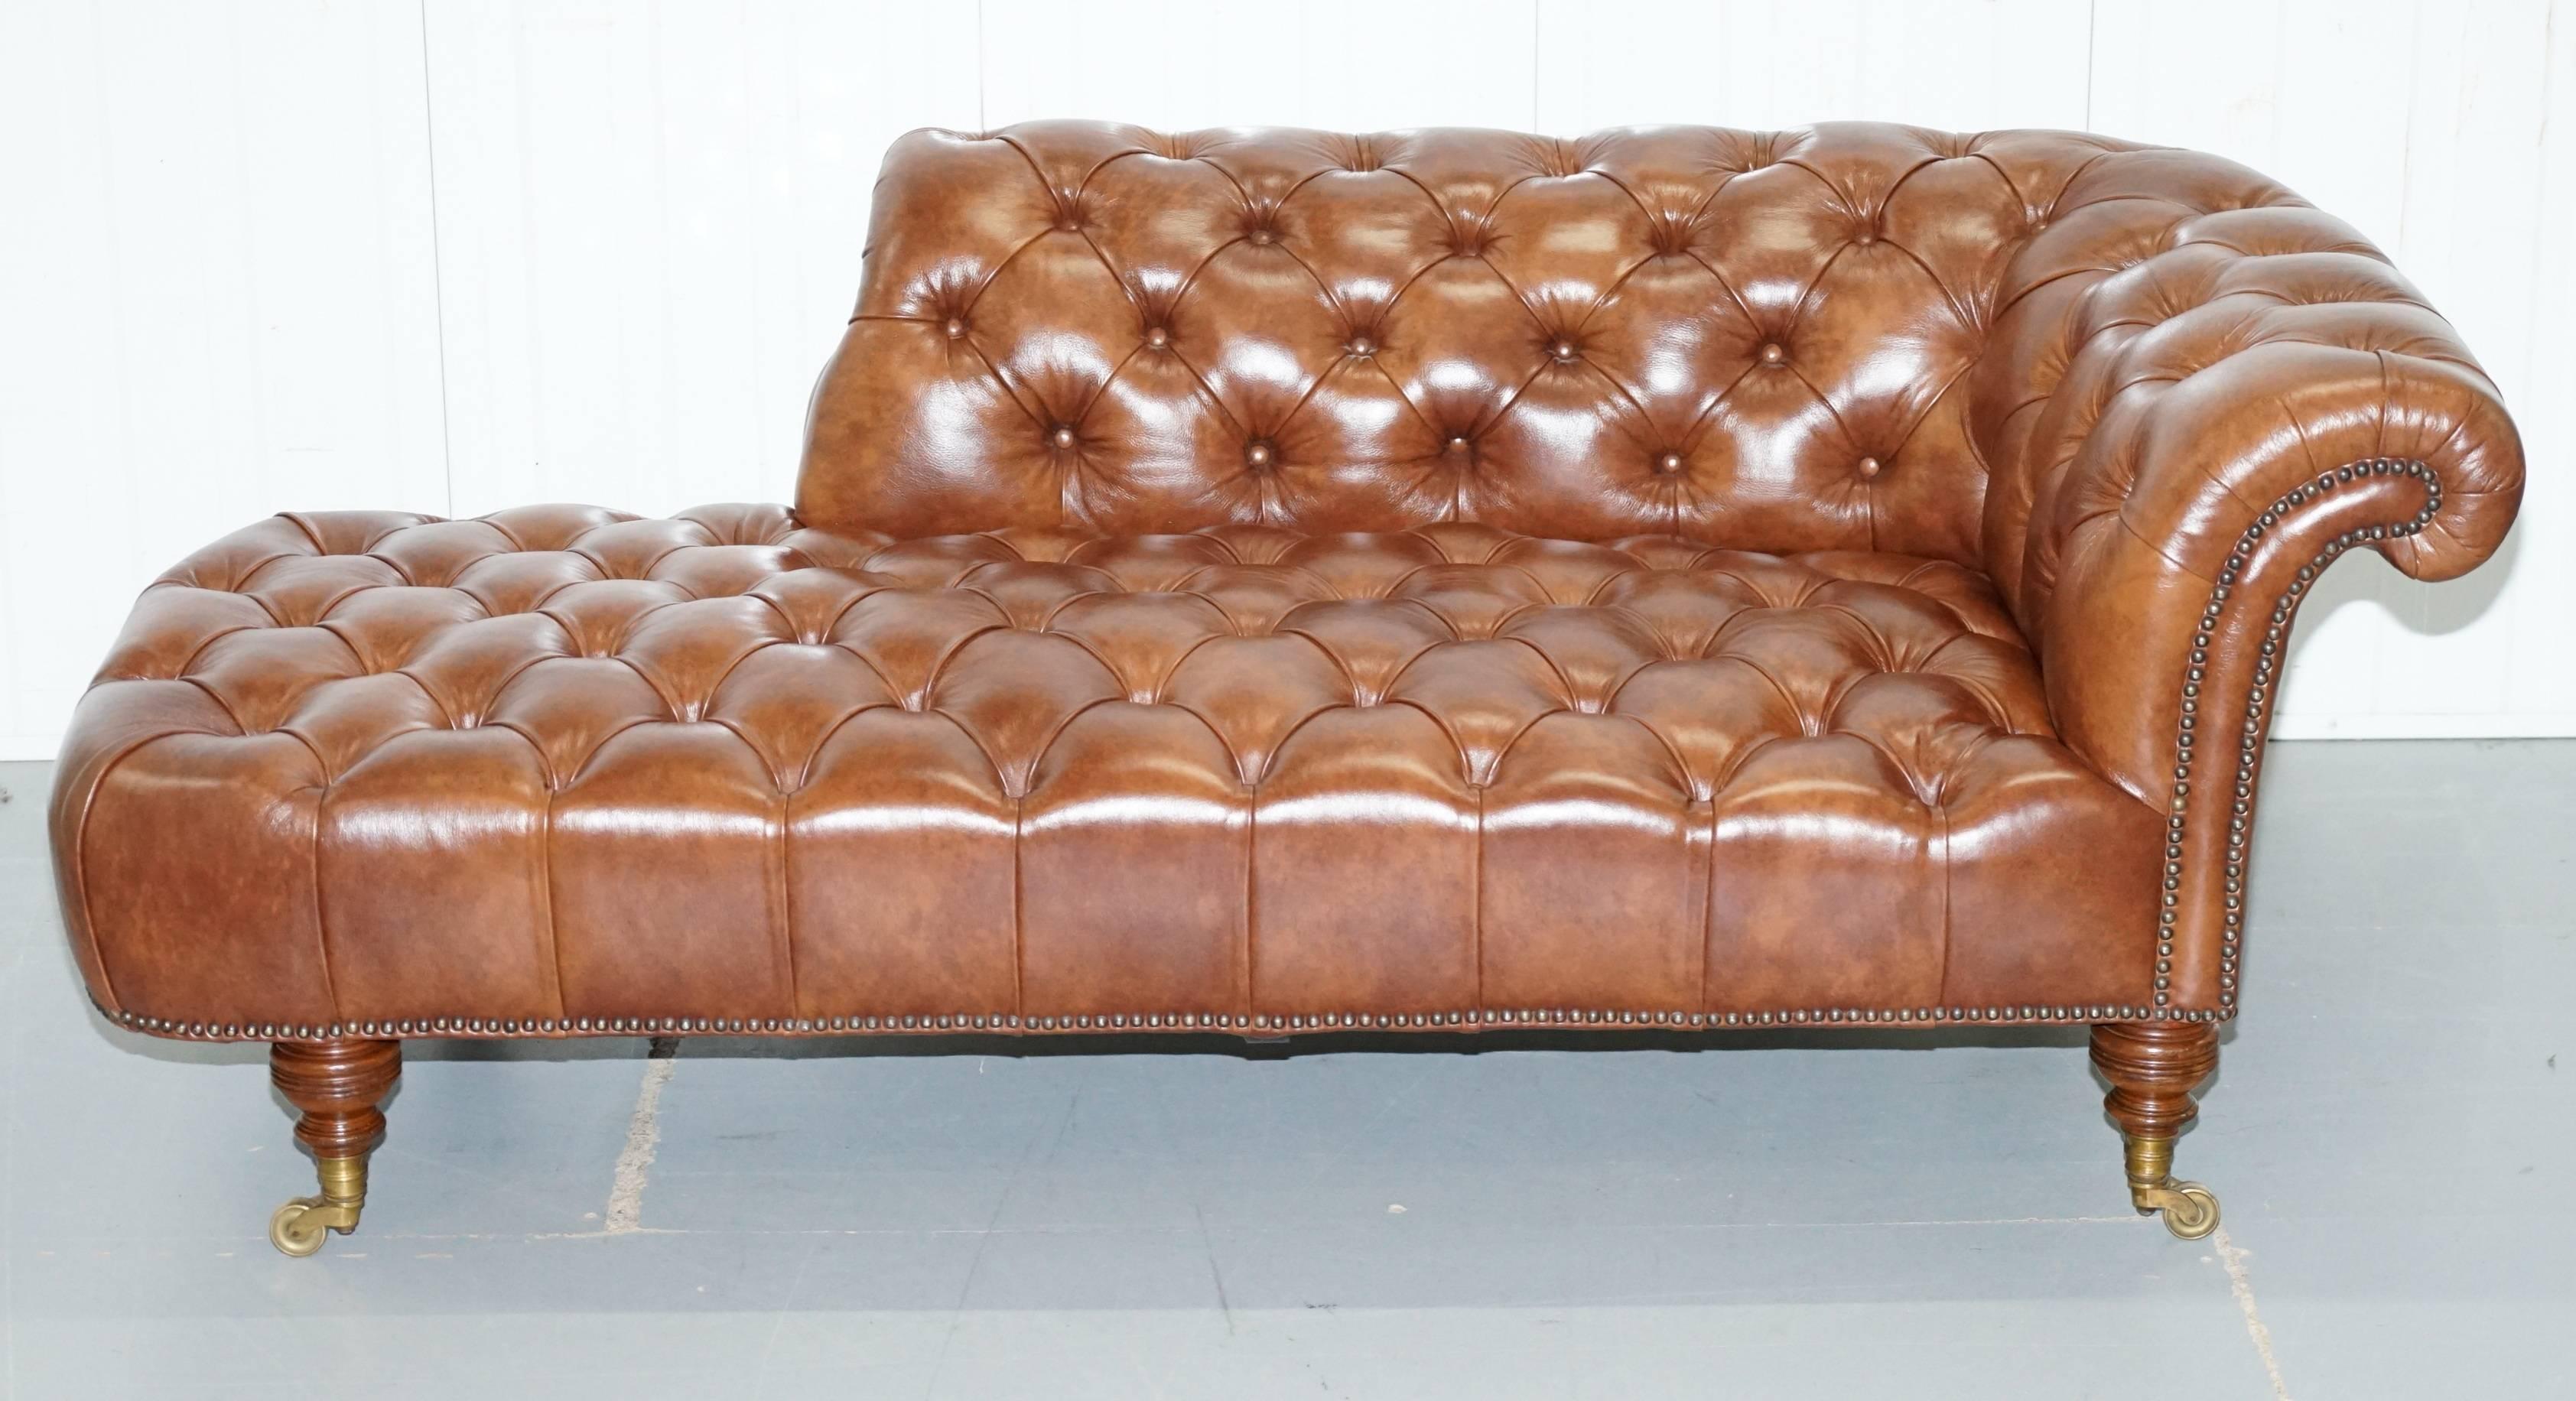 Very rare original Howard & Sons fully stamped with original castors Victorian fully restored brown leather Chesterbed chaise longue.

Please note the delivery fee listed is just a guide, for an accurate quote please send me your postcode and